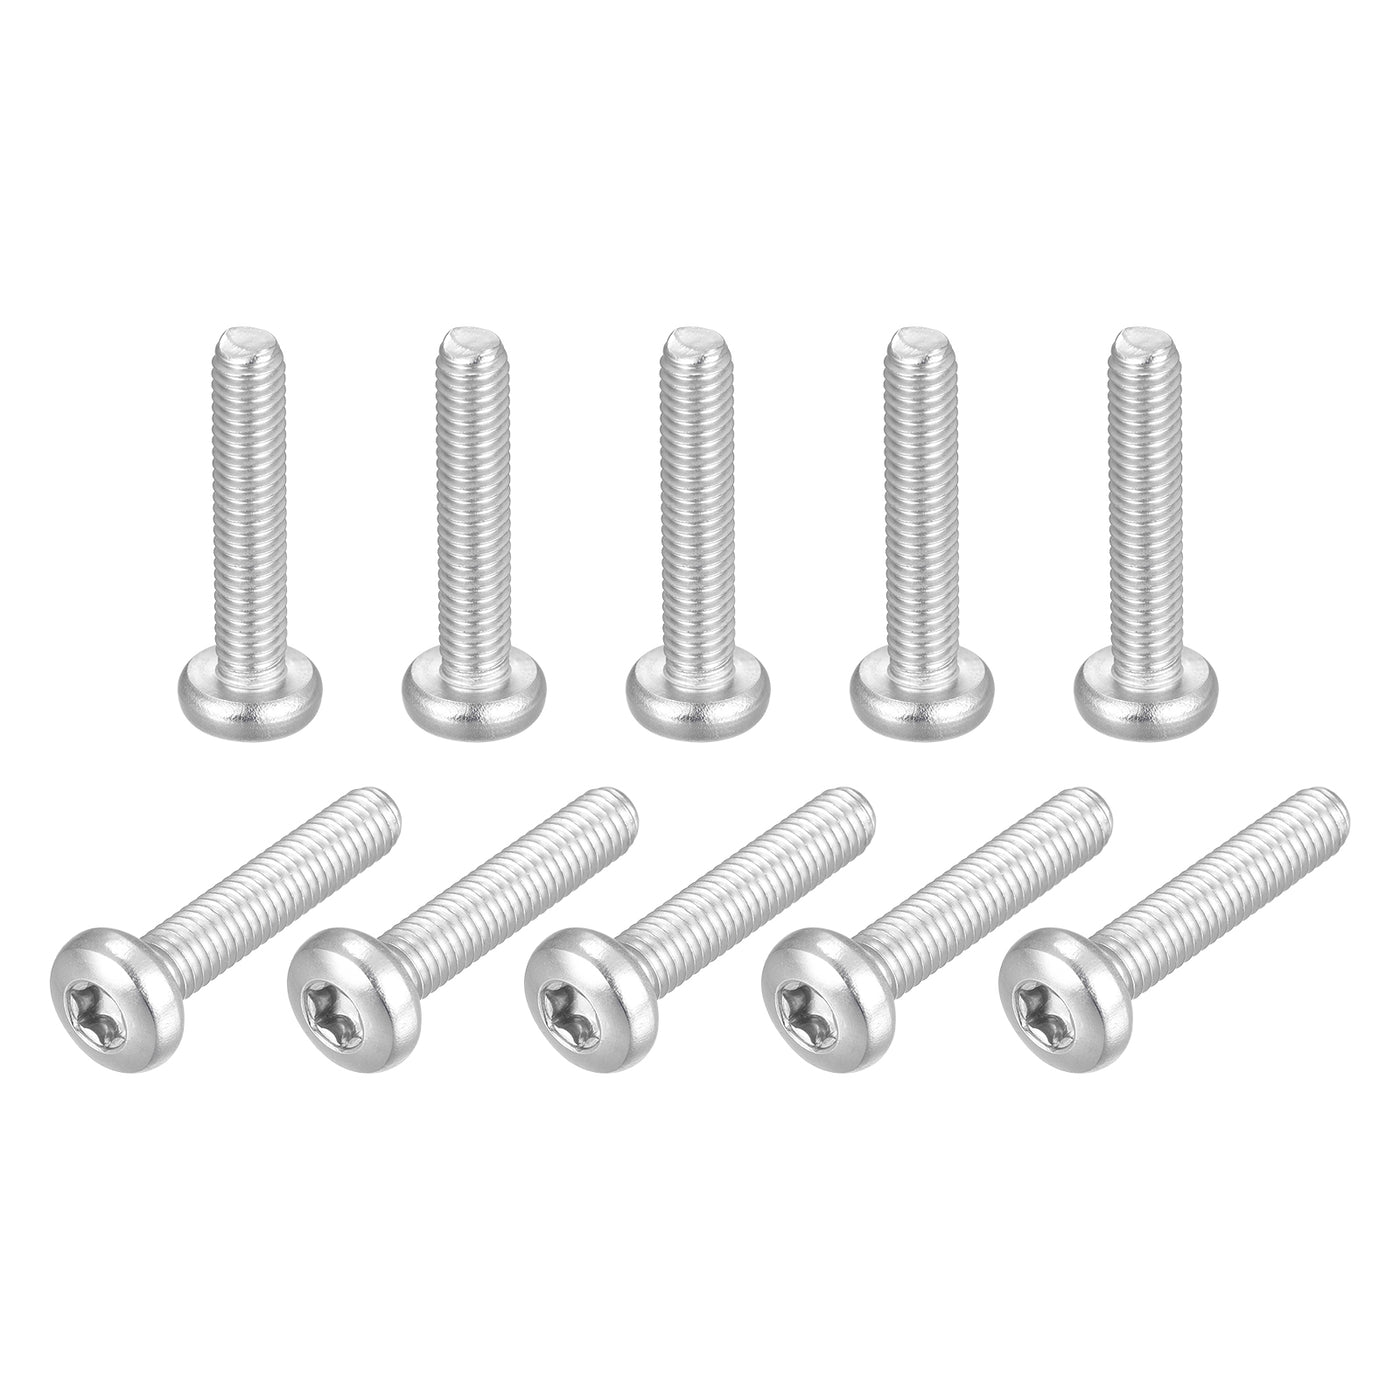 uxcell Uxcell M6x30mm Torx Security Machine Screws, 10pcs 316 Stainless Steel Pan Head Screw